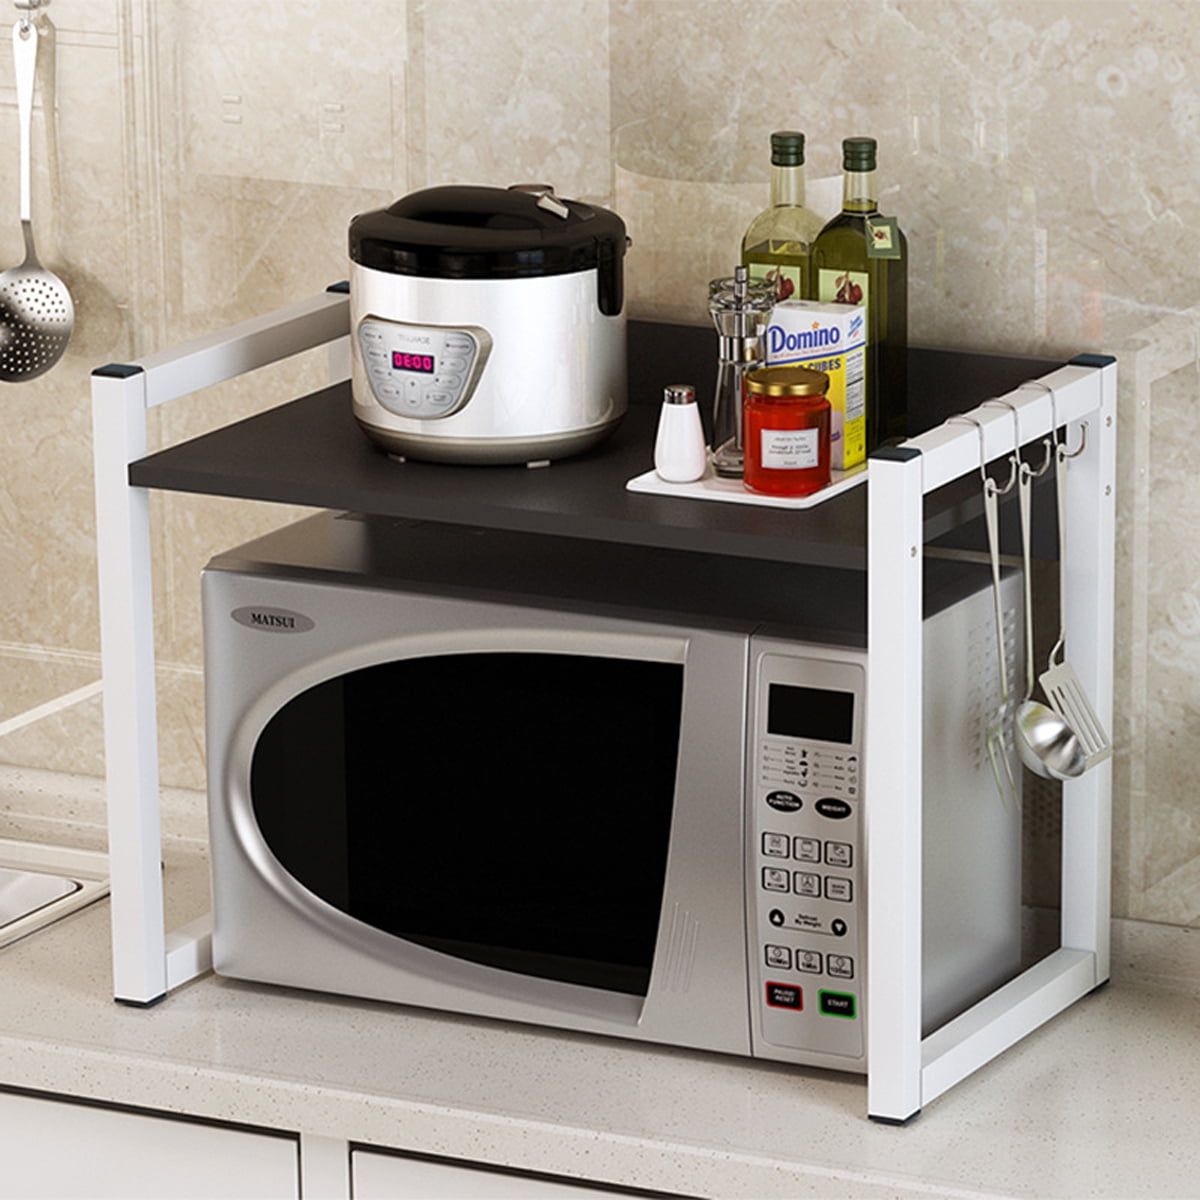 The Benefits of a Countertop Microwave Stand